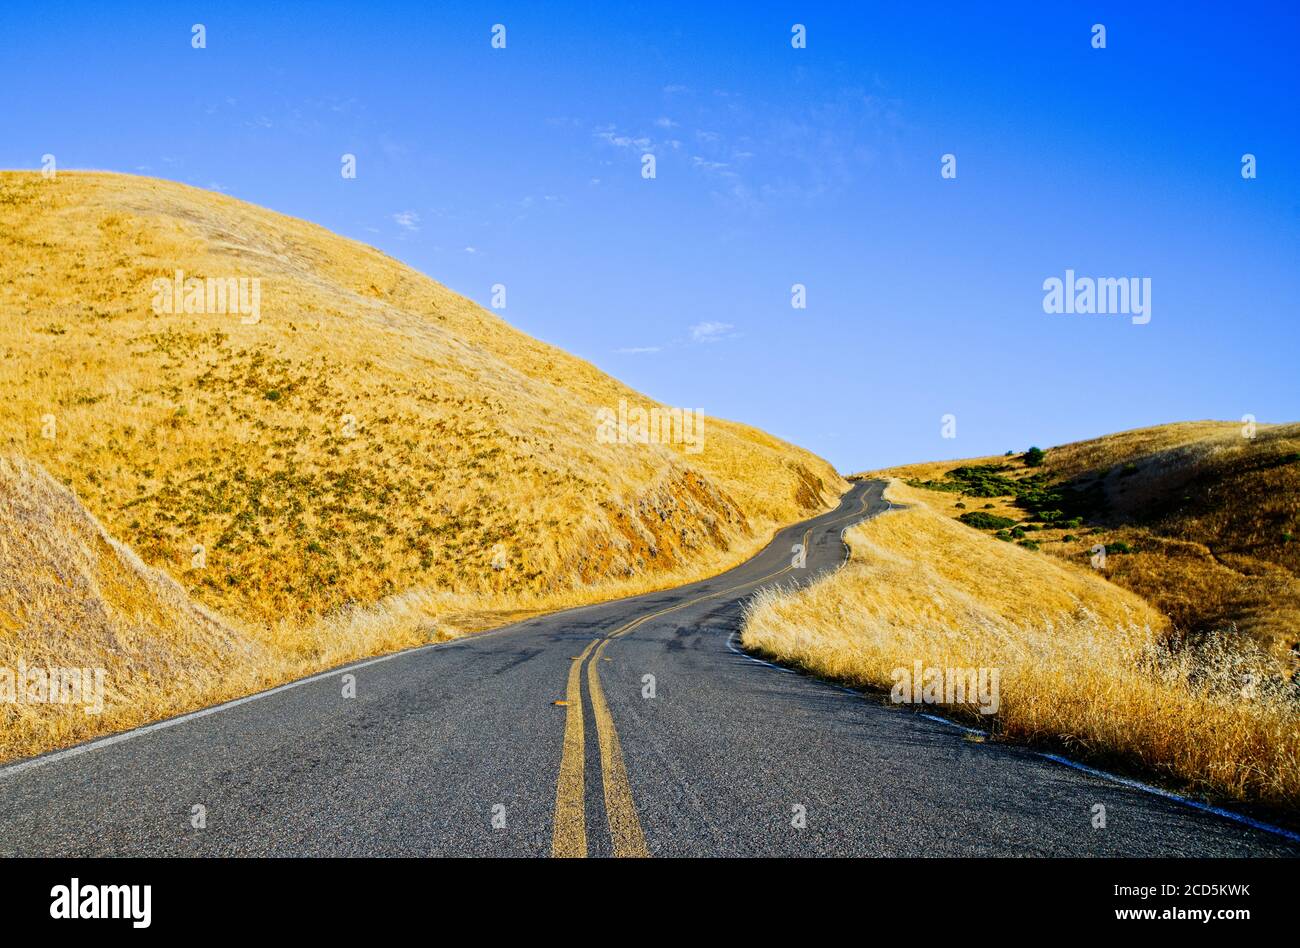 View of road between hills, Marin County, California, USA Stock Photo